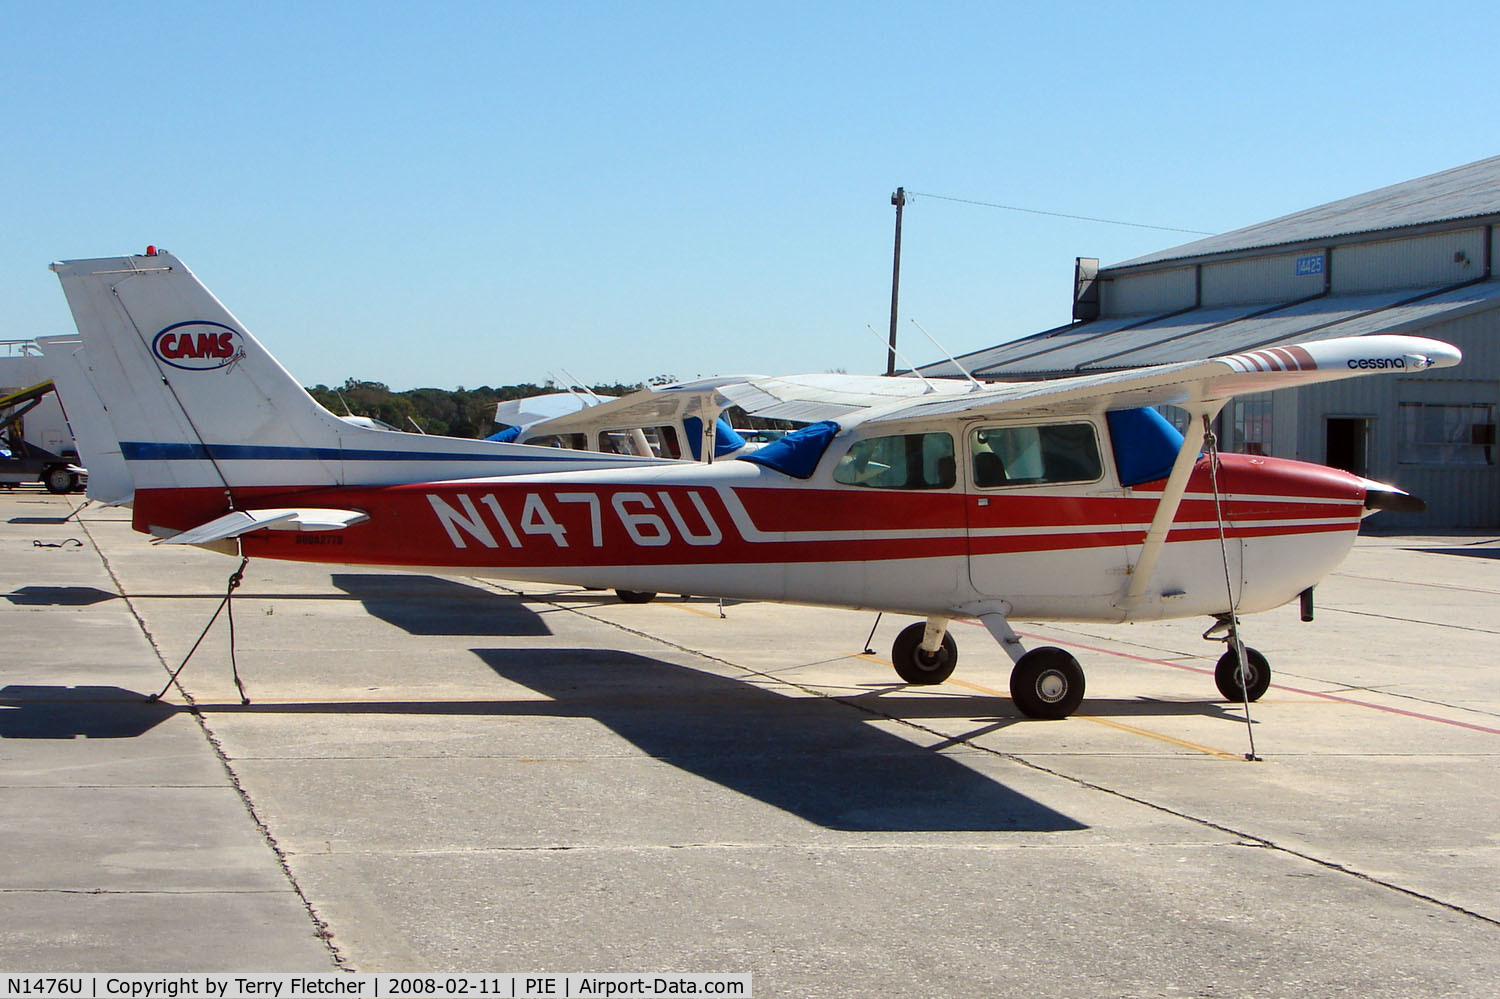 N1476U, 1976 Cessna 172M C/N 17267143, Part of the General Aviation scene at St.Petersburg-Clearwater Int Airport